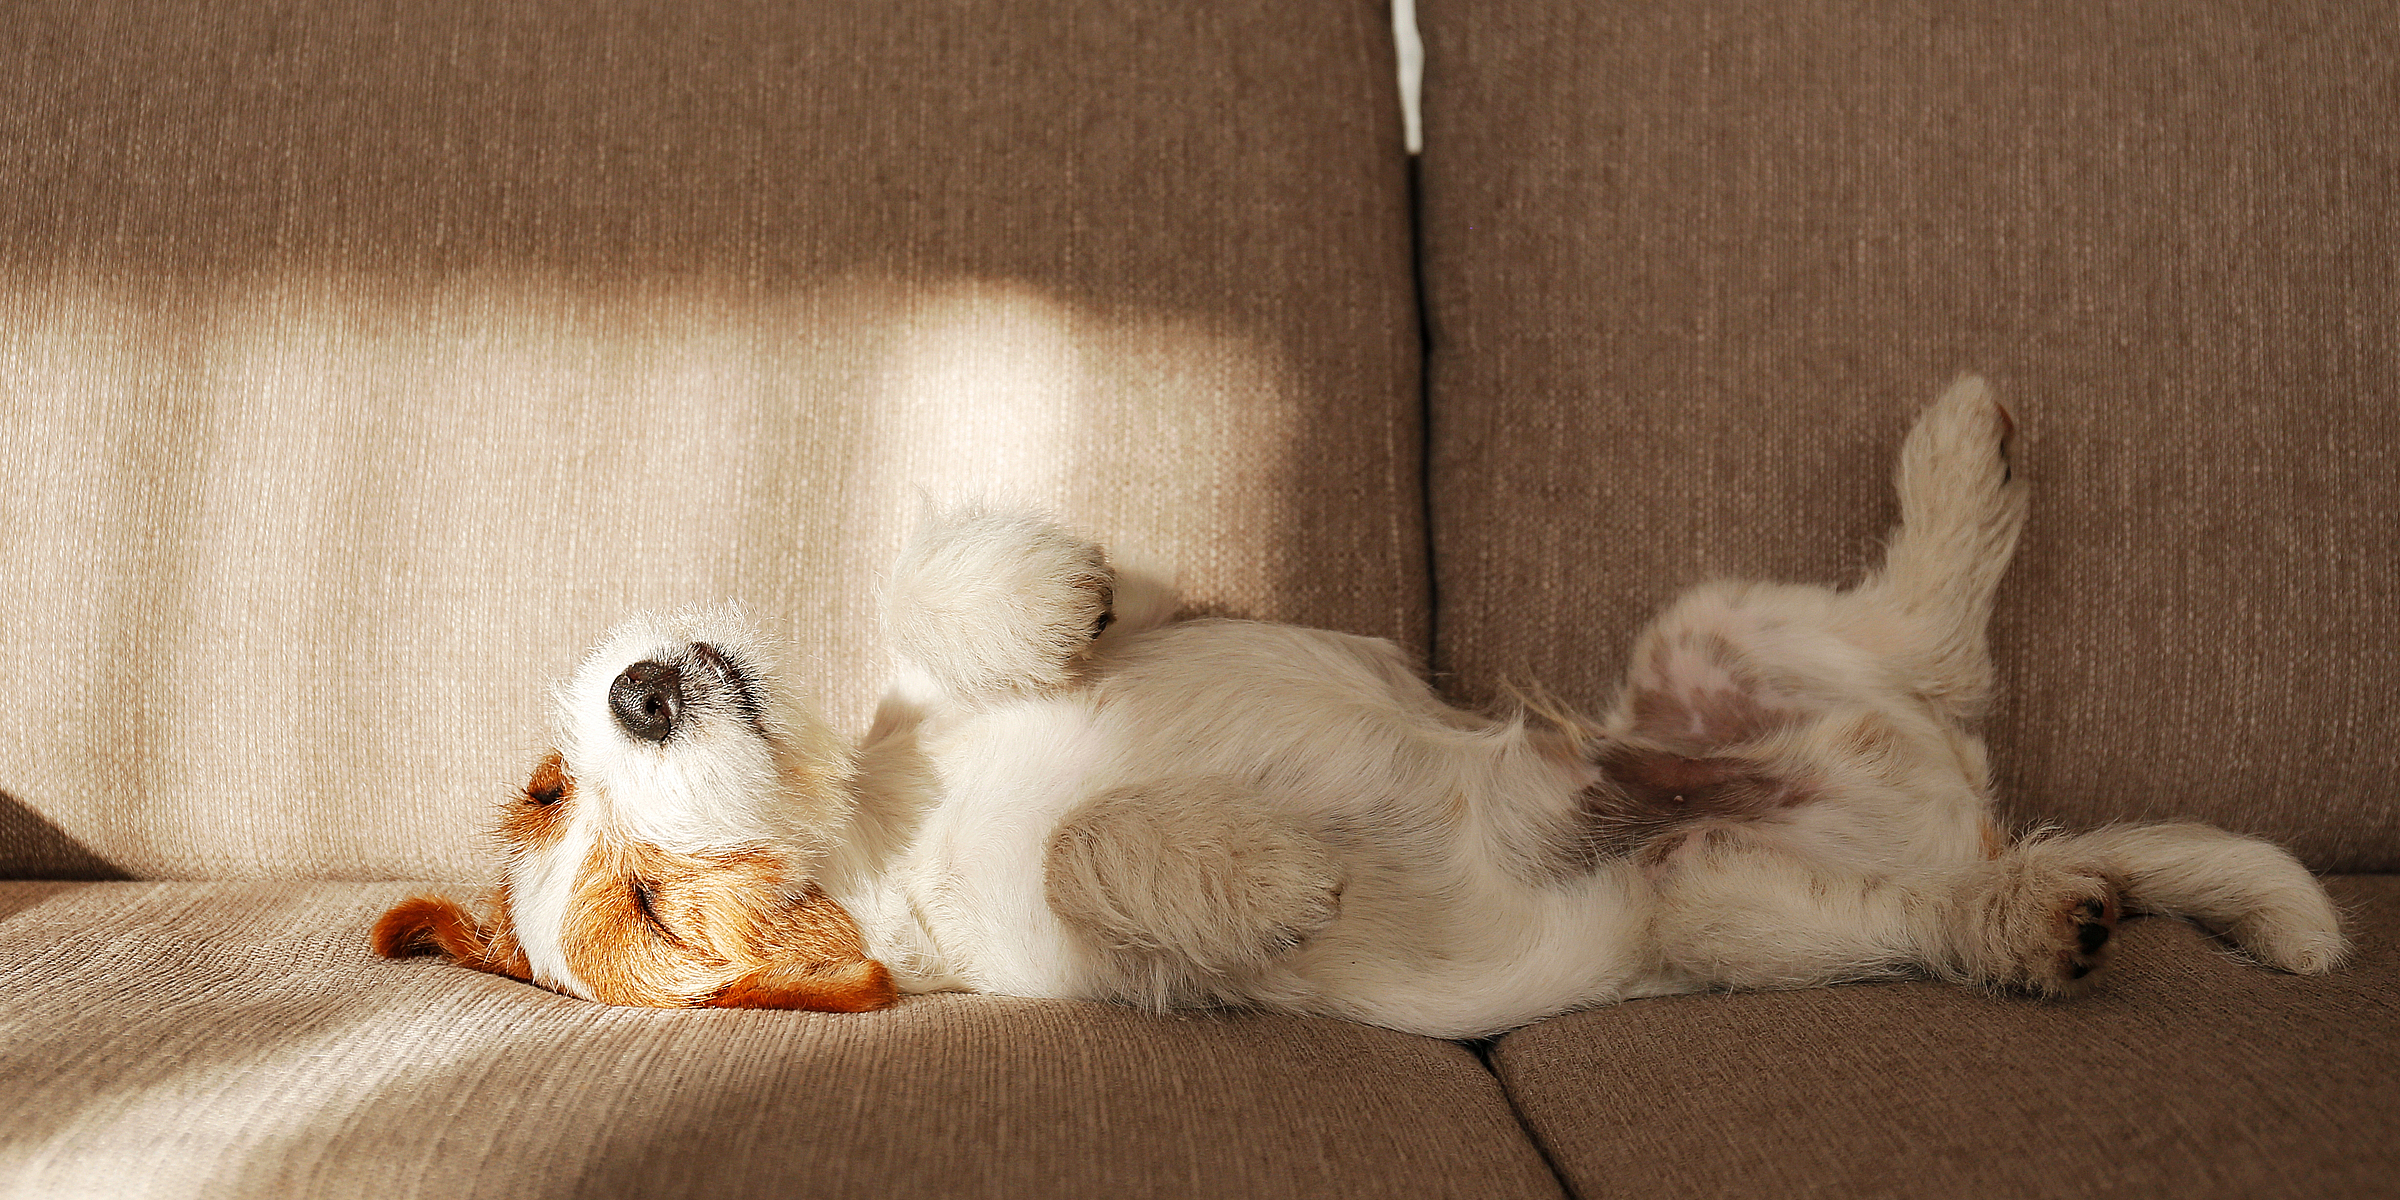 A dog lounging on a couch | Source: Shutterstock